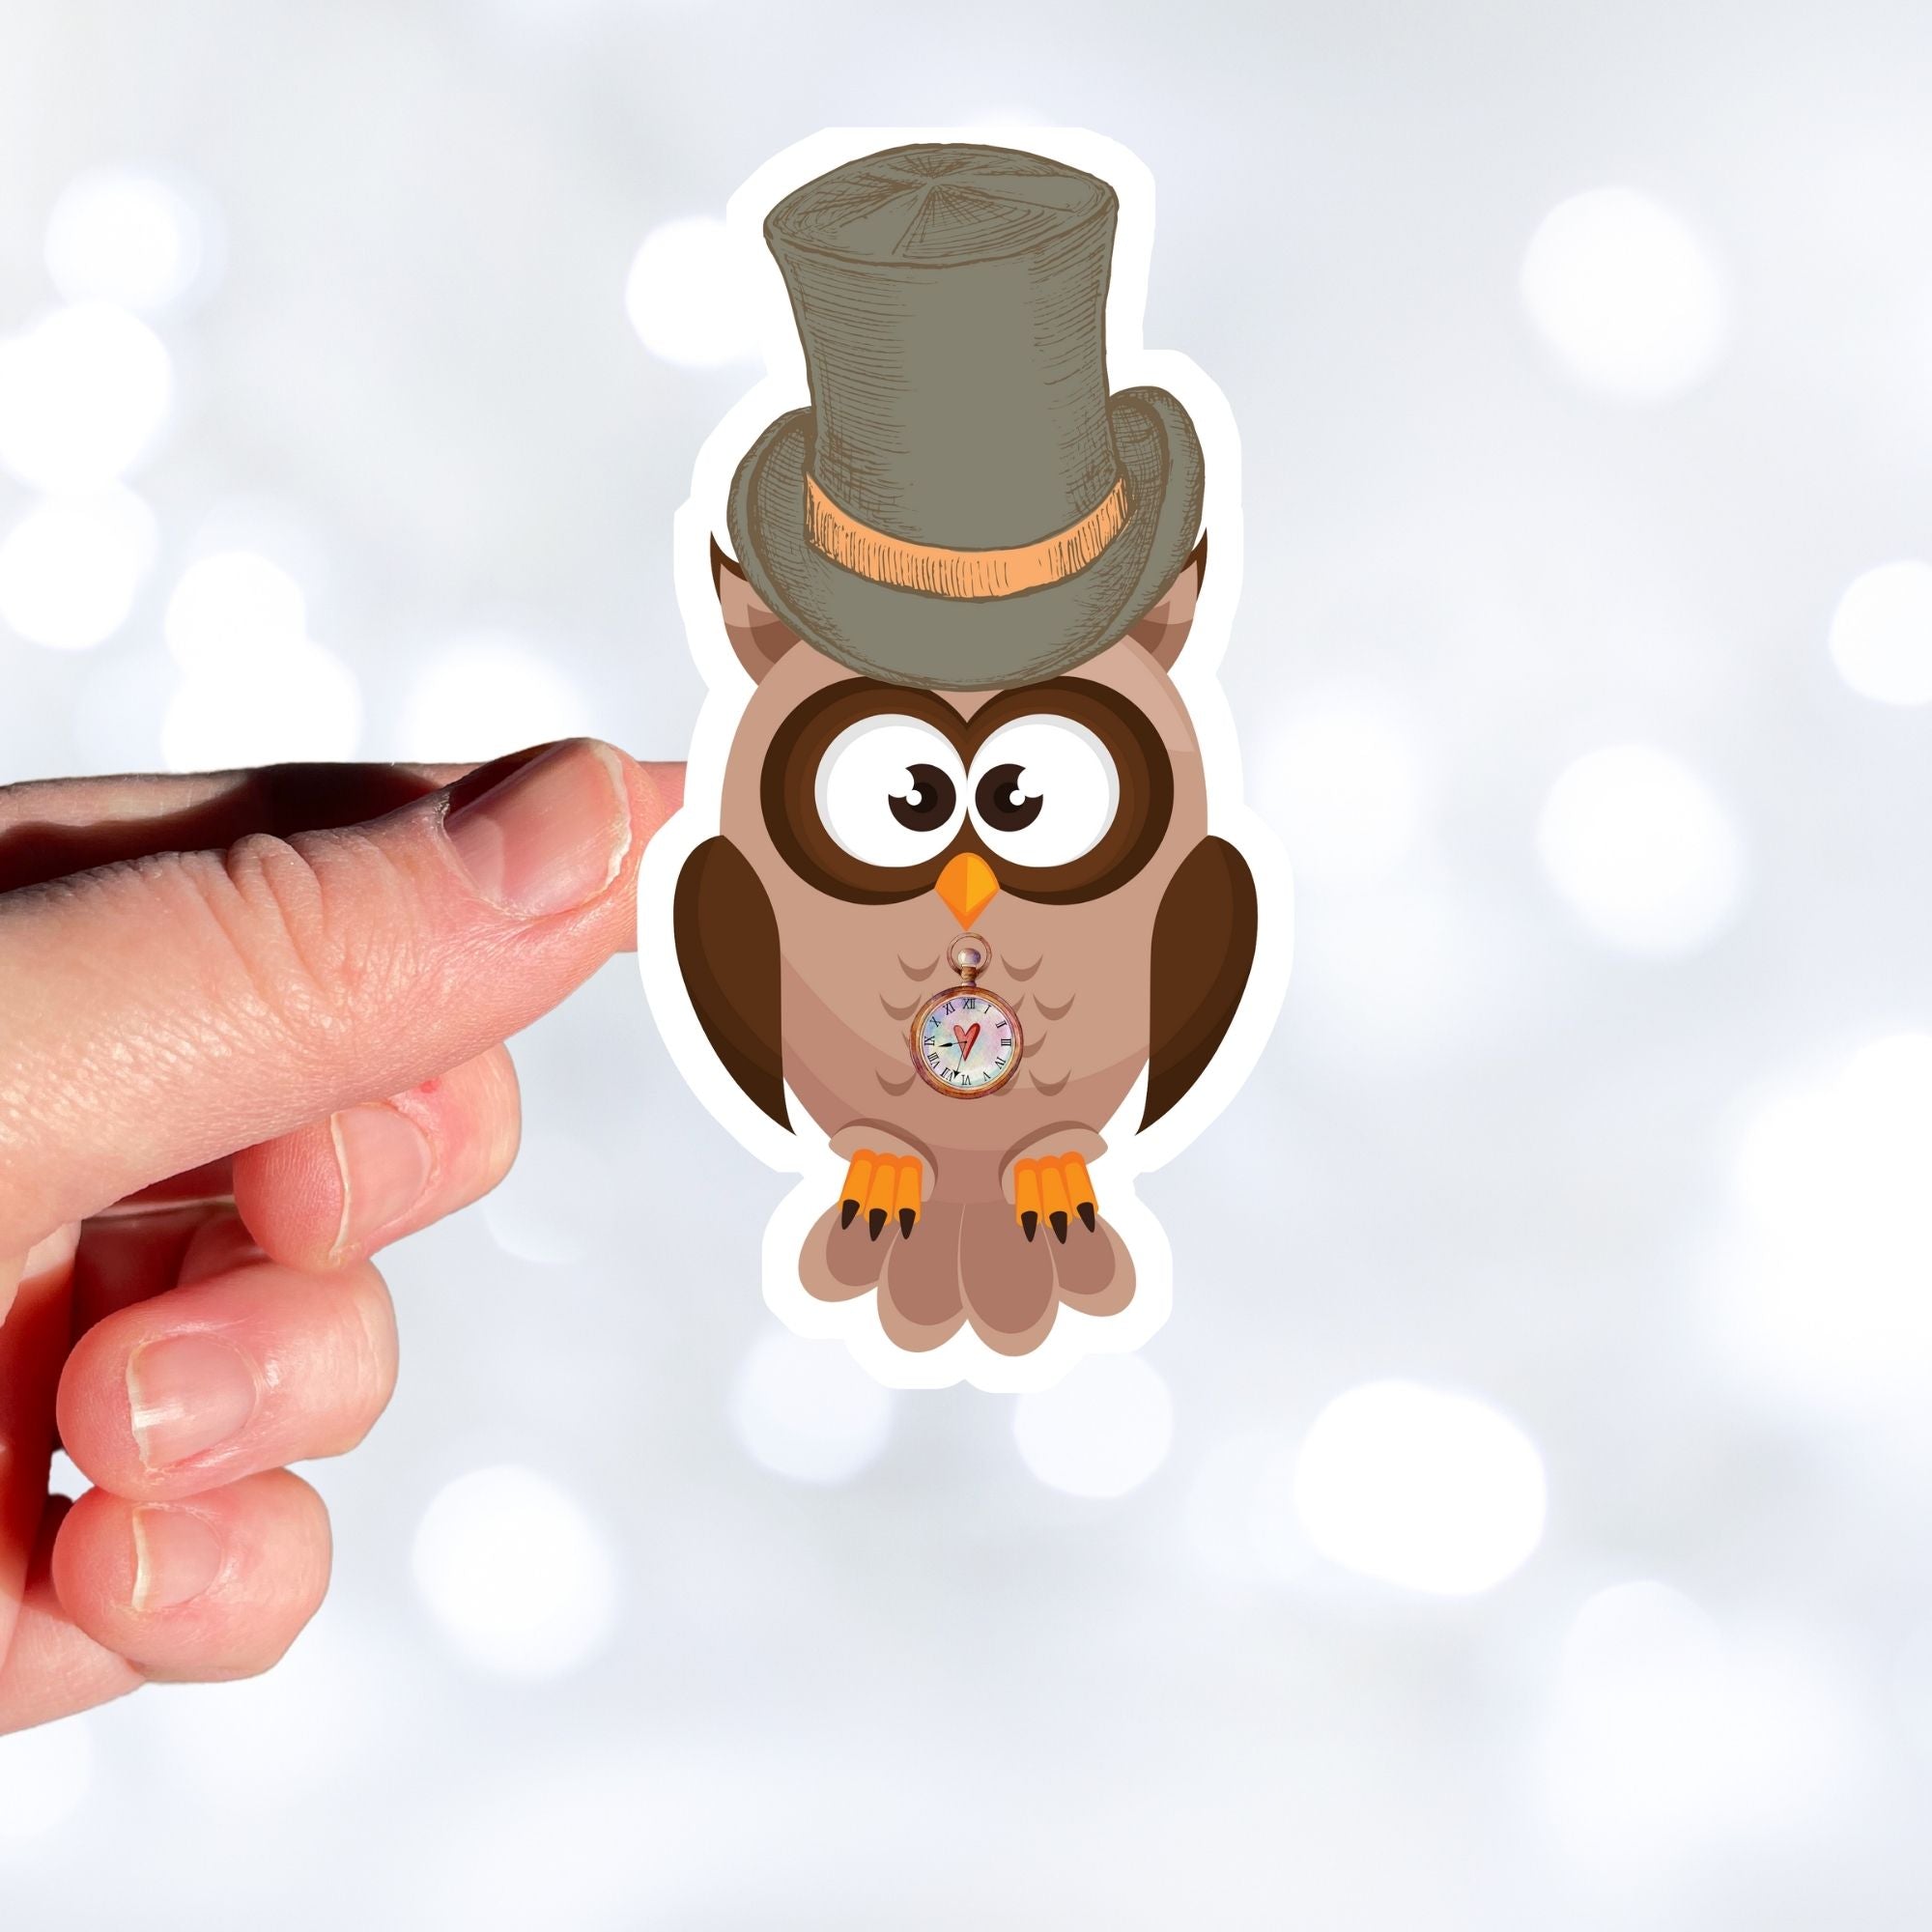 Mr. Owl is a distinguished looking steampunk owl with top hat and a pocket watch medallion. This image shows Mr. Owl being held above a white background